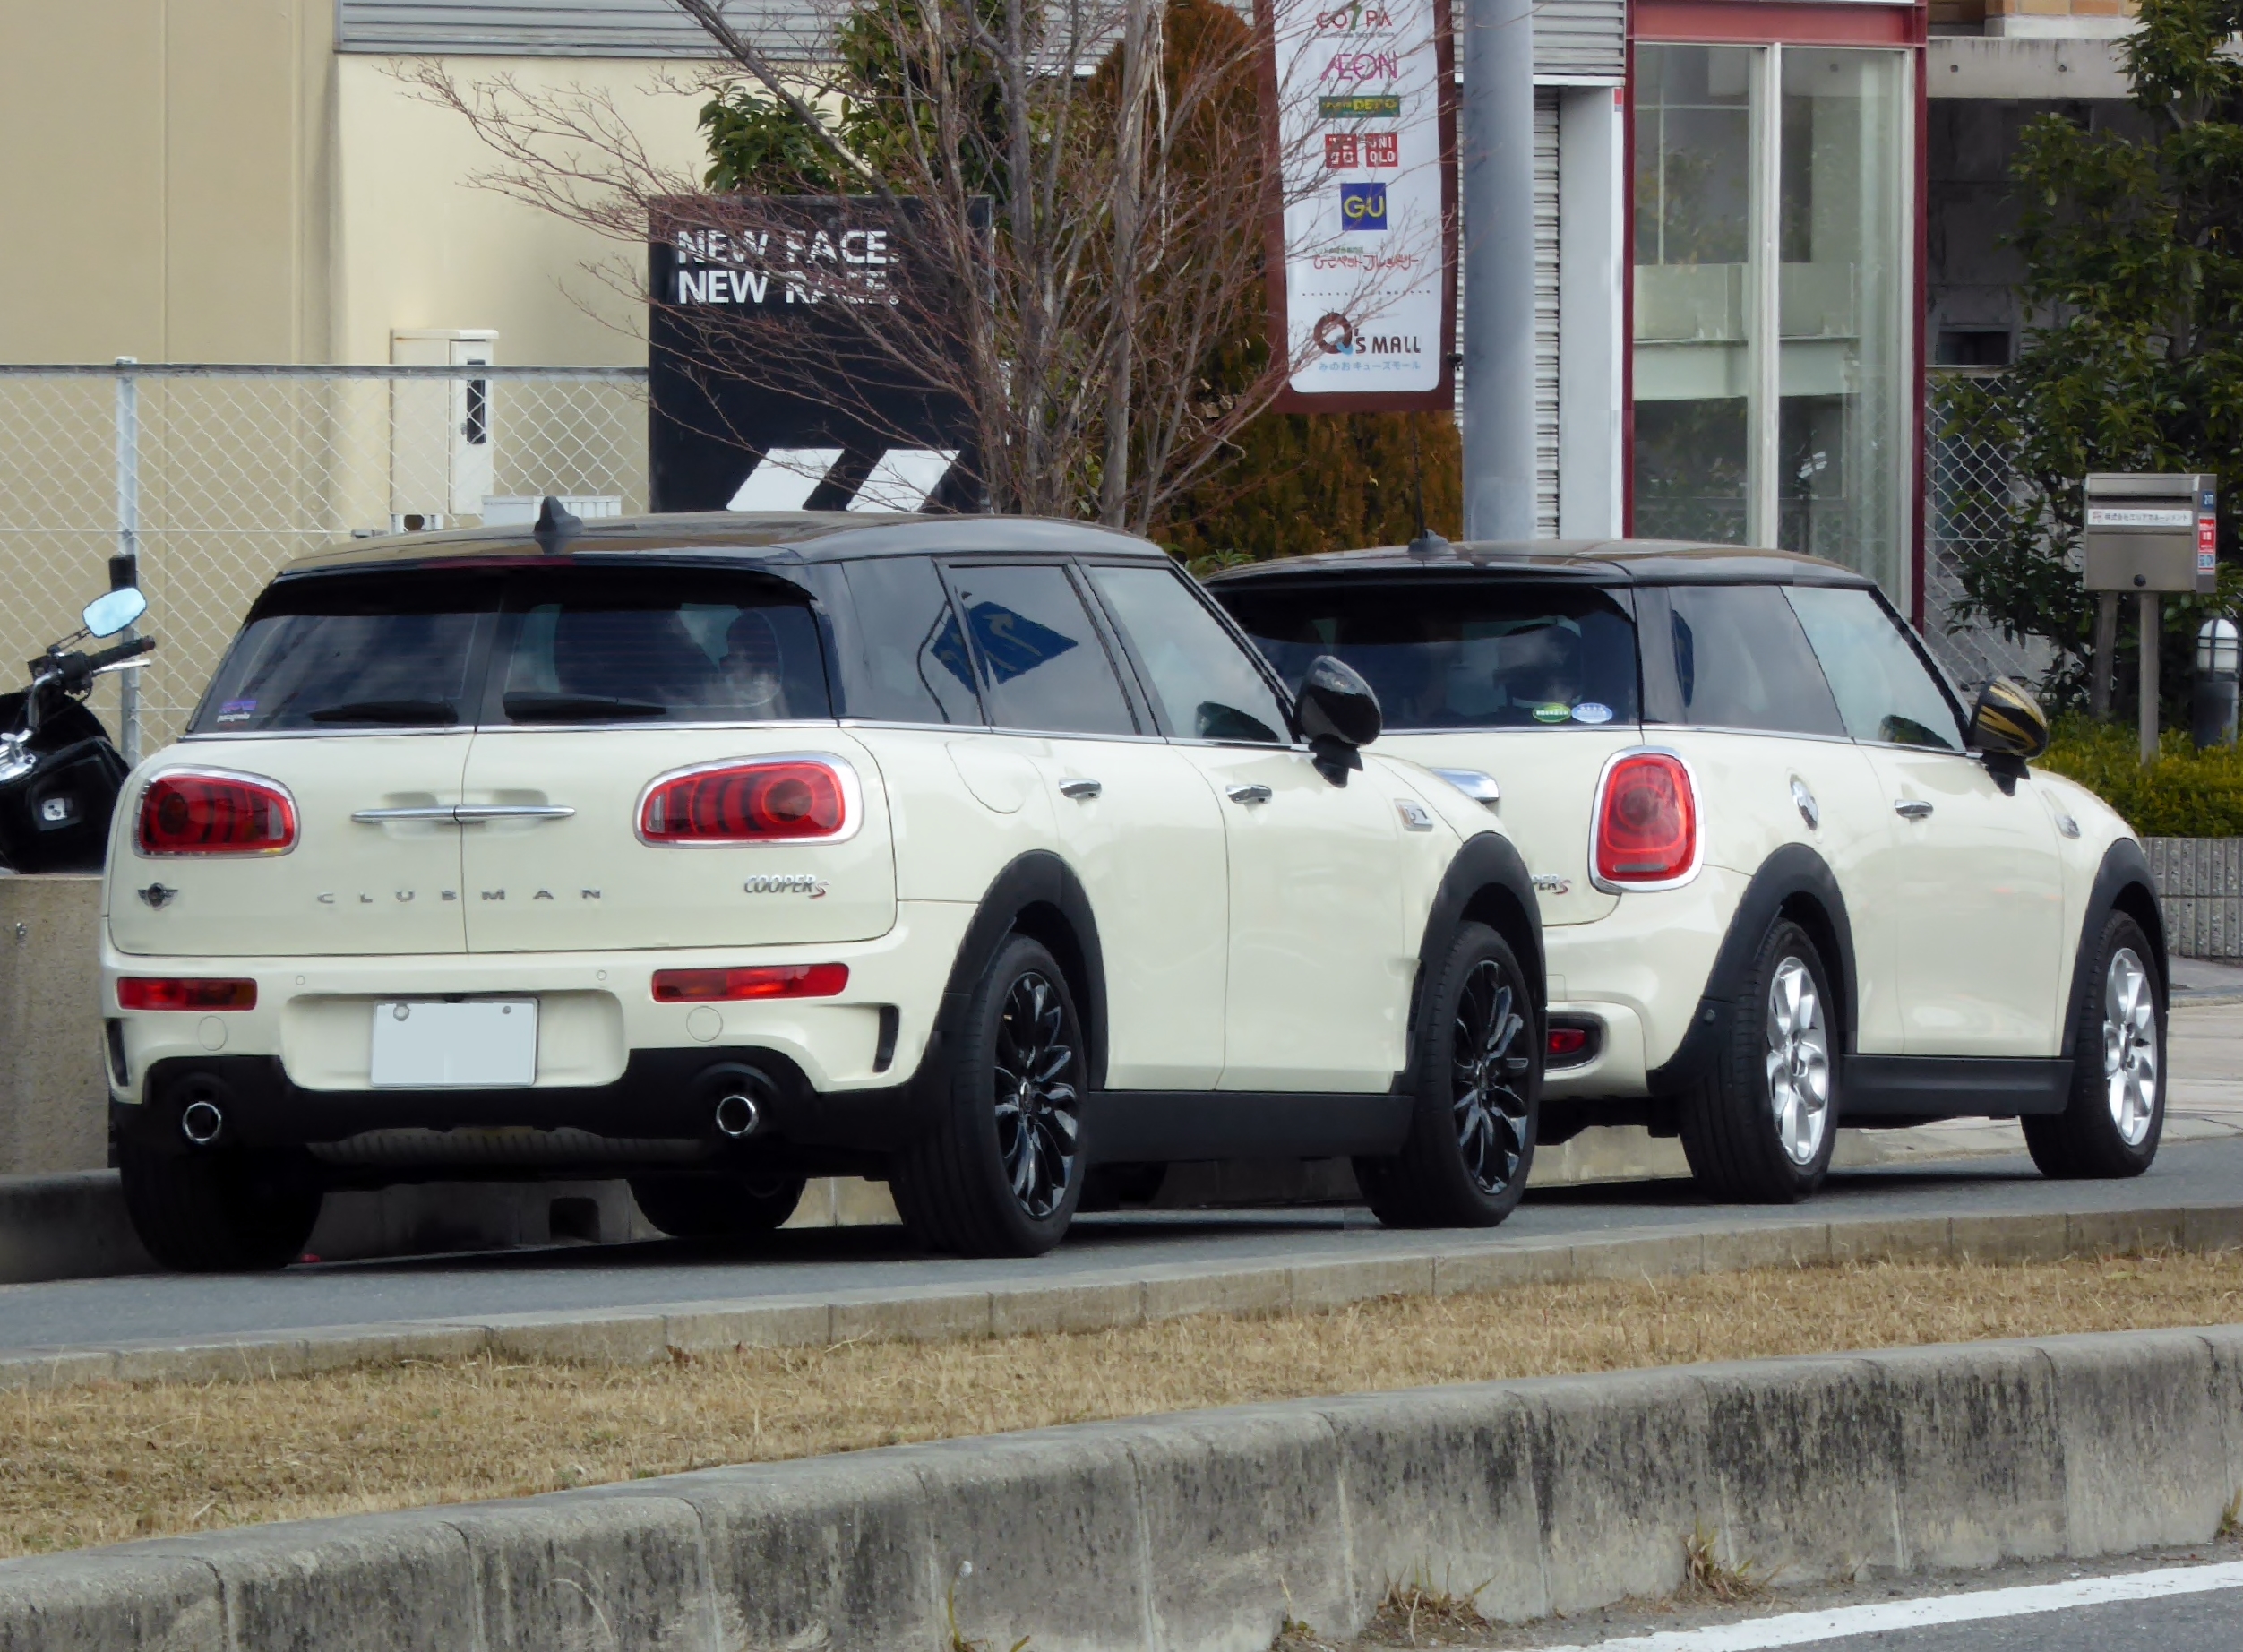 File:The rearview of BMW MINI COOPER CLUBMAN (F54).jpg - Wikimedia Commons